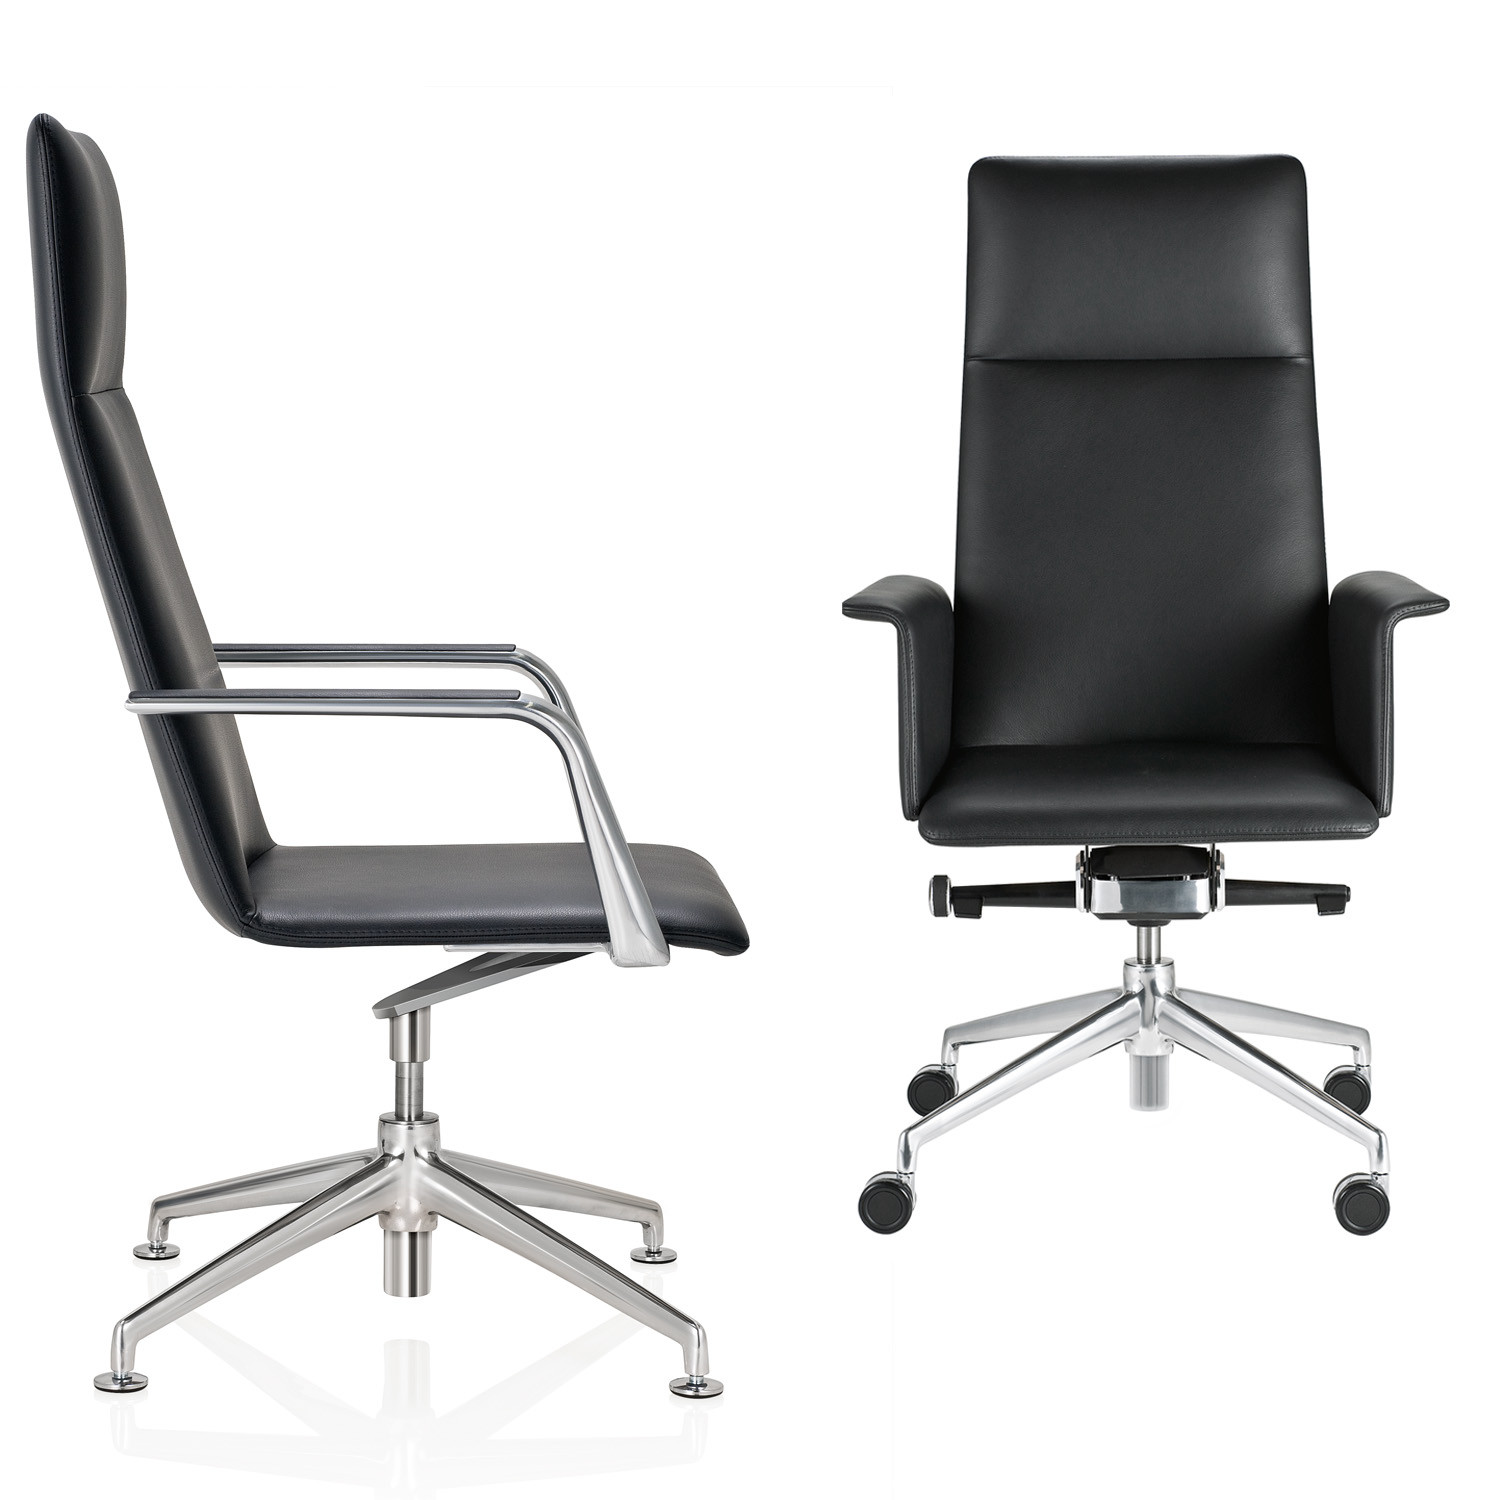 FinaSoft Conference Swivel Chairs are available with Glides or Castors